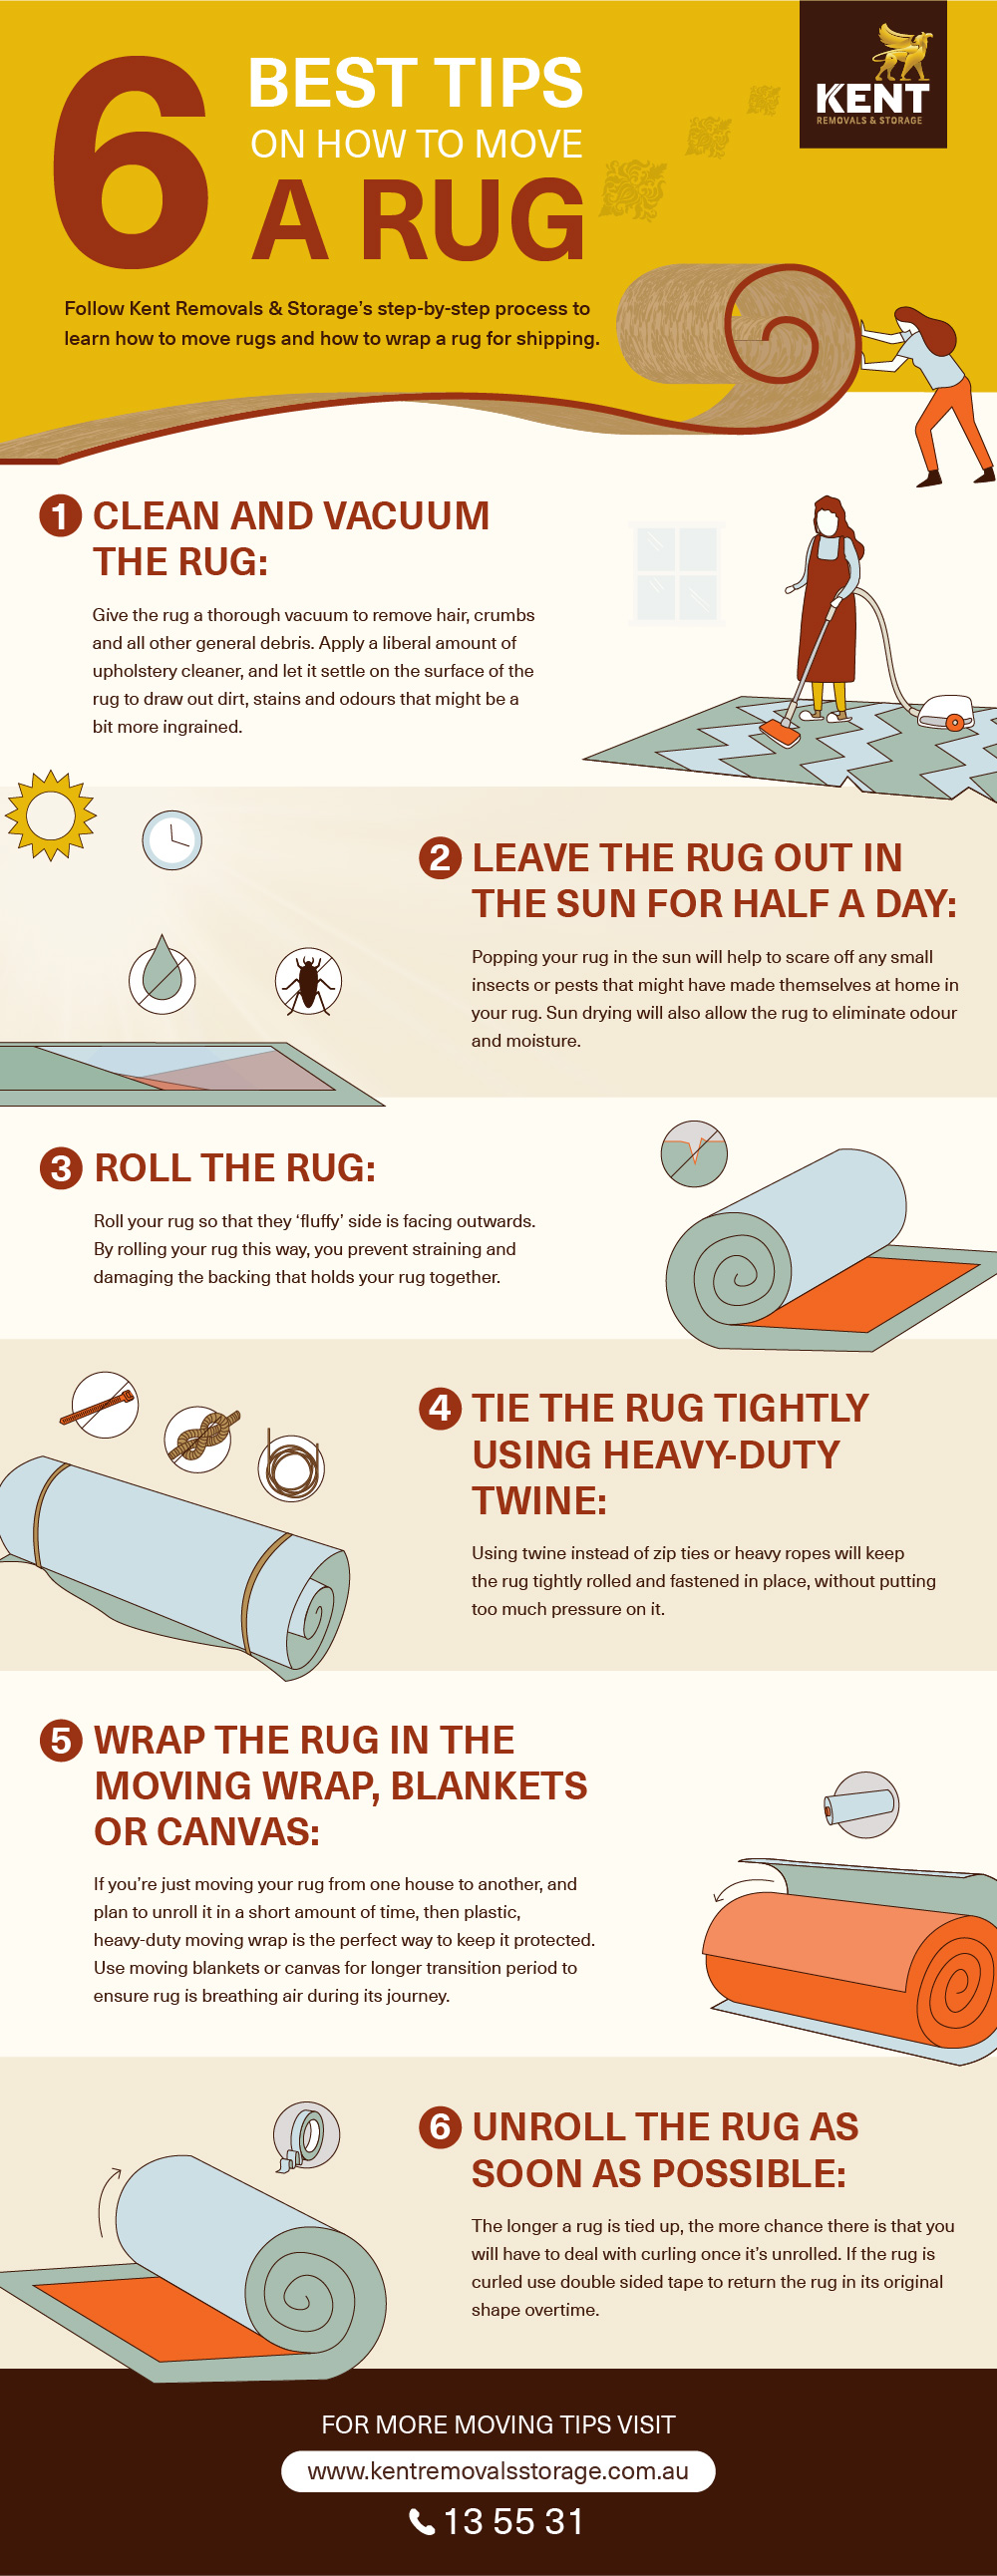 https://www.kentremovalsstorage.com.au/wp/wp-content/uploads/2019/09/6-BEST-TIPS-ON-HOW-TO-MOVE-A-RUG.jpg